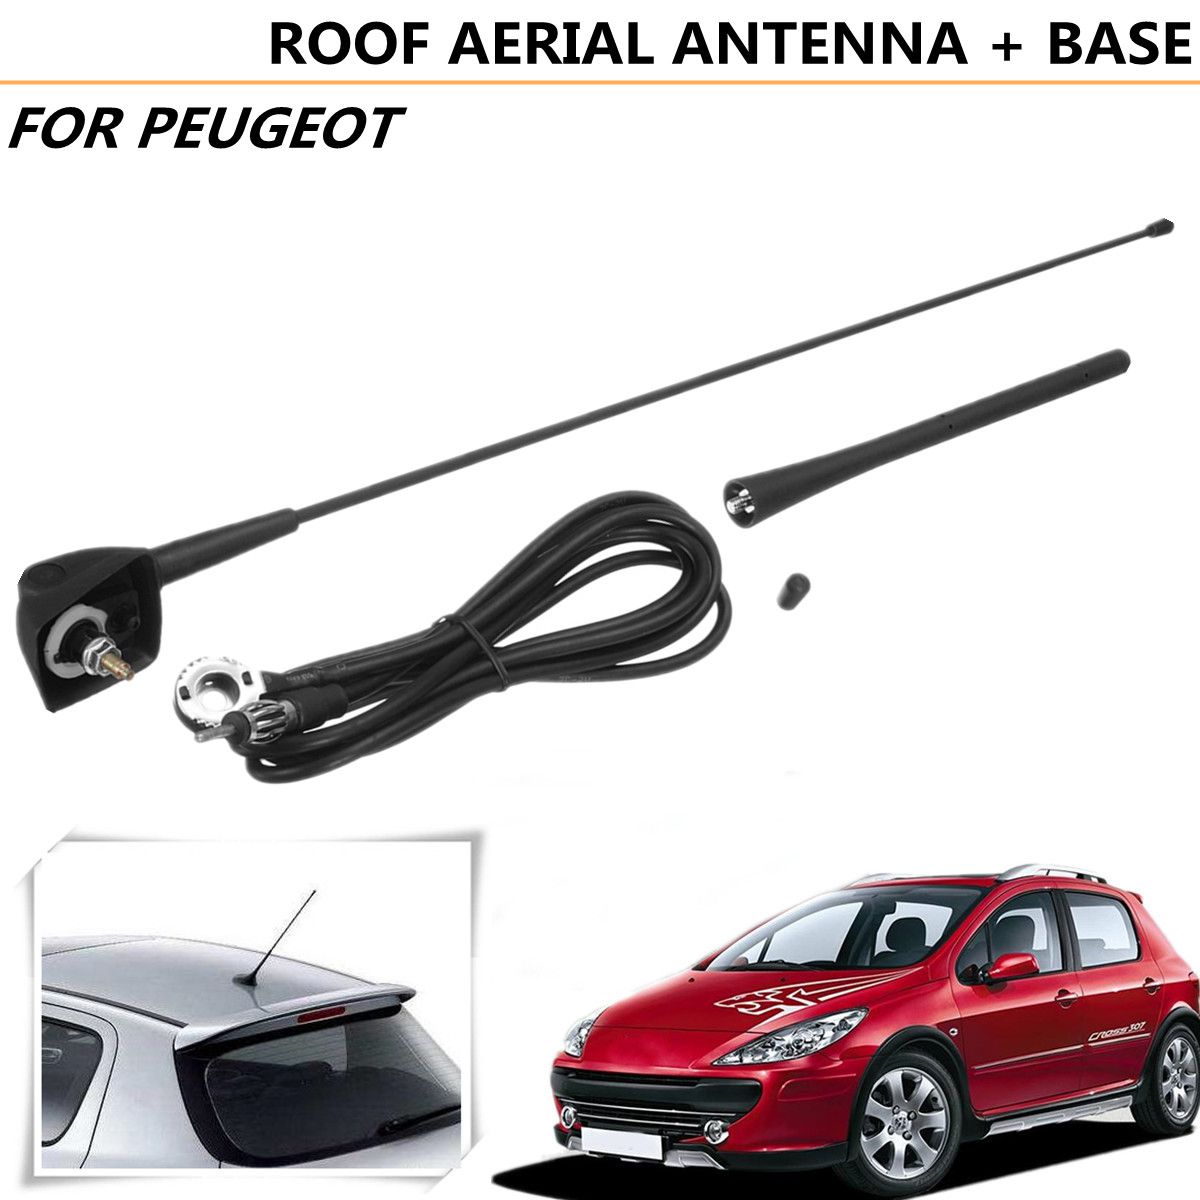 Viviance Base Roof Aerial Antenna+Mount For Peugeot 106 205 206 306 307 309 406 806 807